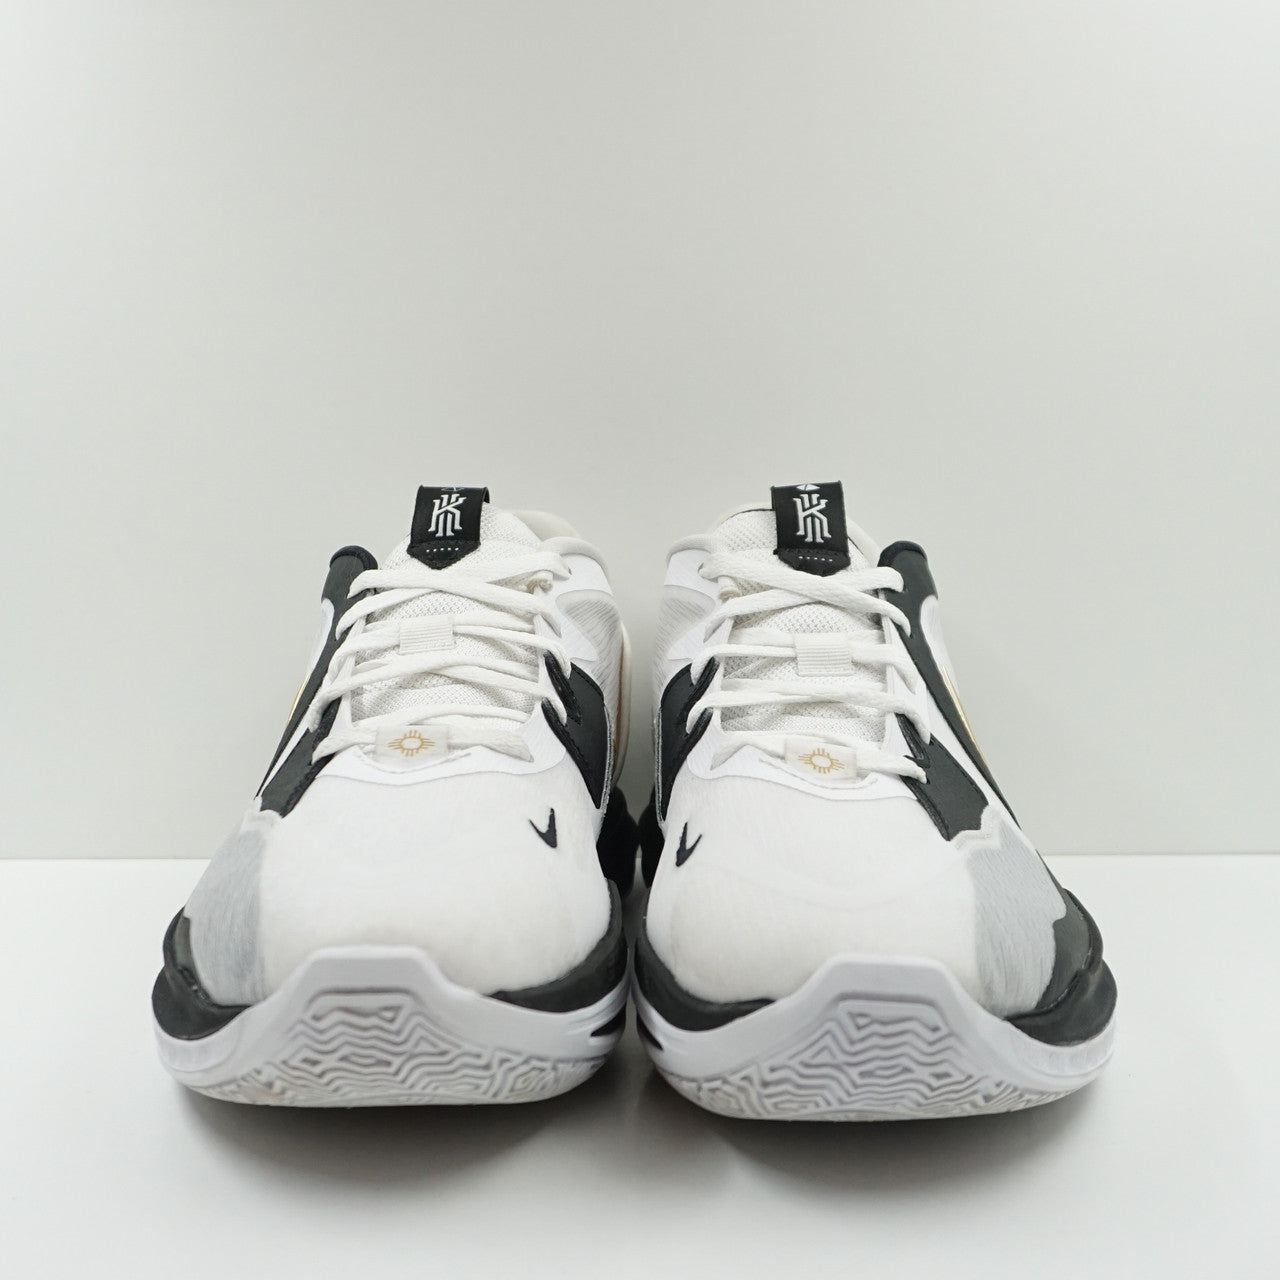 Nike Kyrie Low 5 White Gold